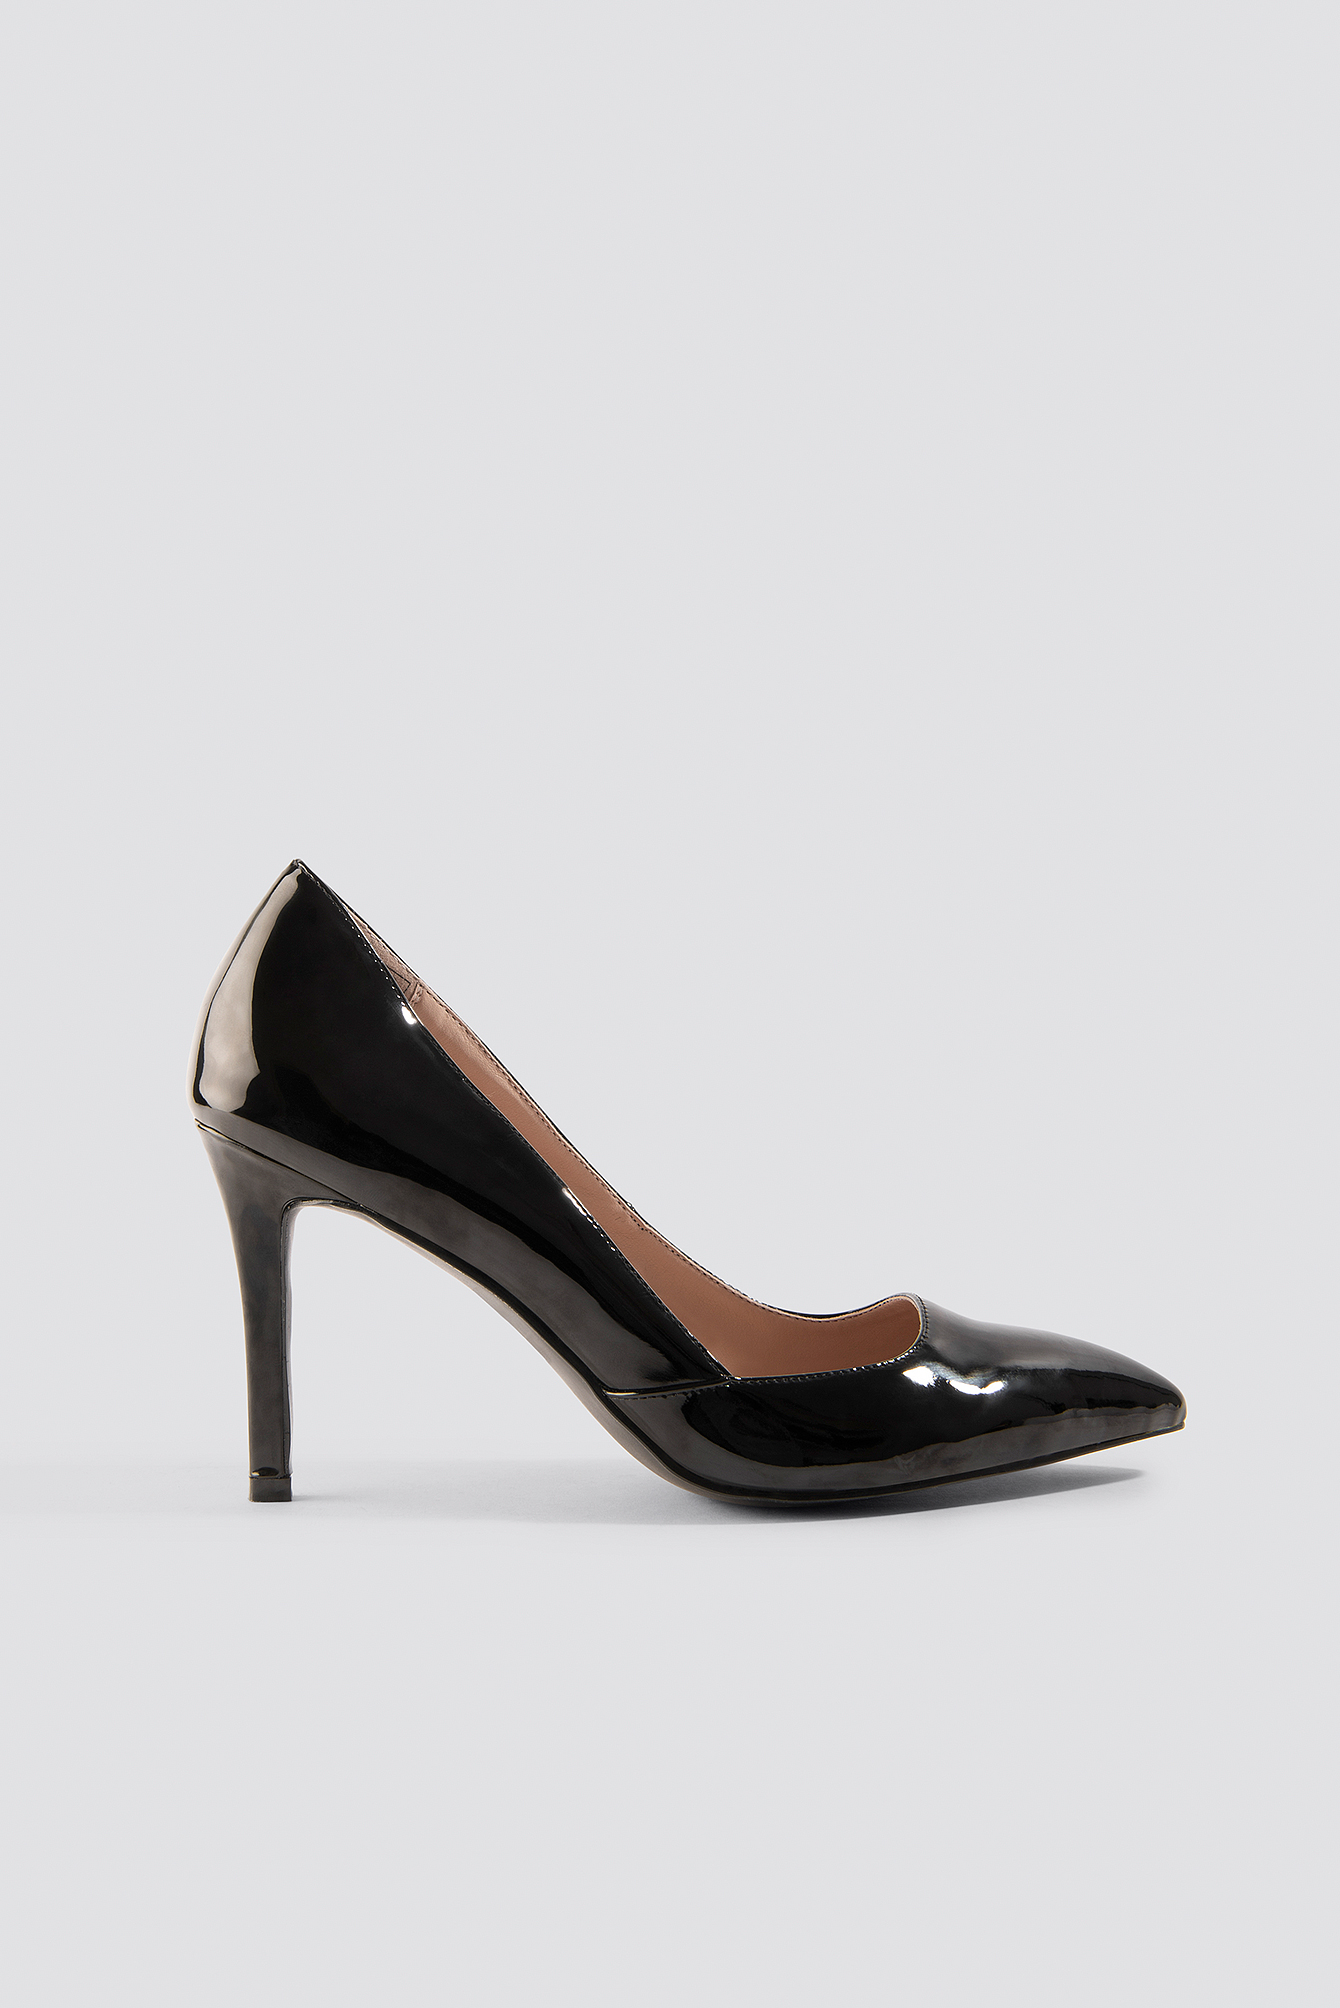 NA-KD Shoes Classy Pointy Pumps - Black